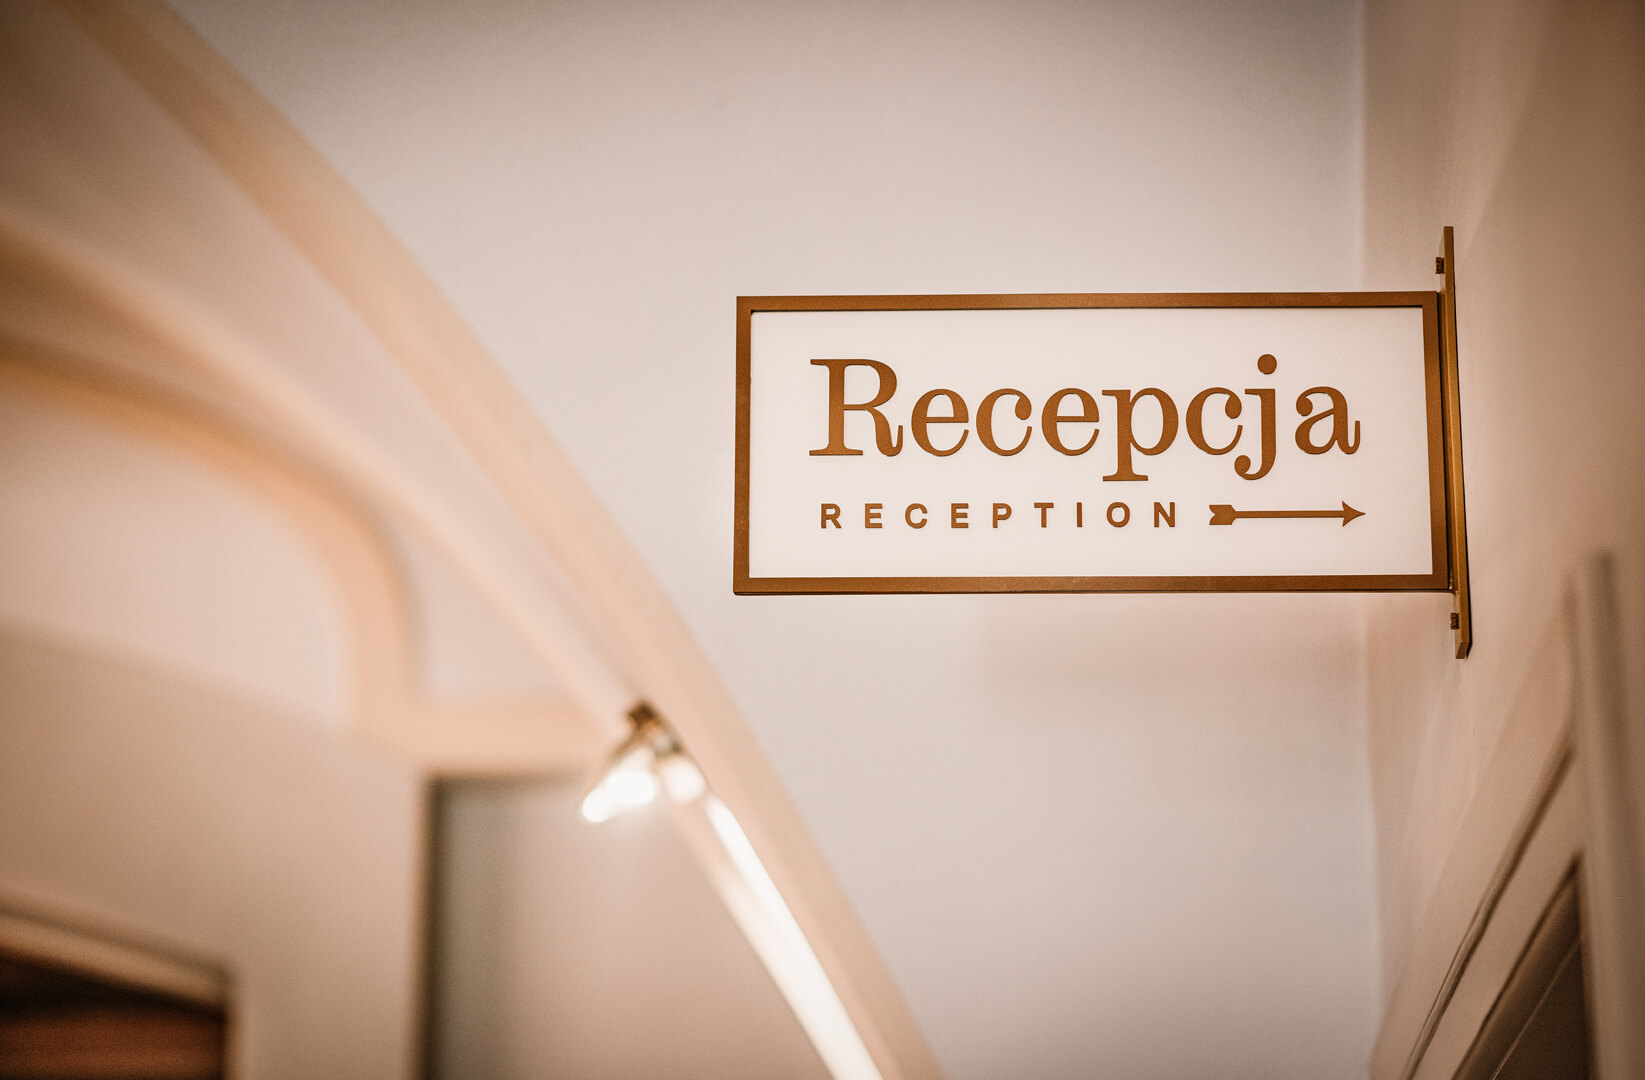 Reception signage - semaphore pointing to the reception area in the lobby